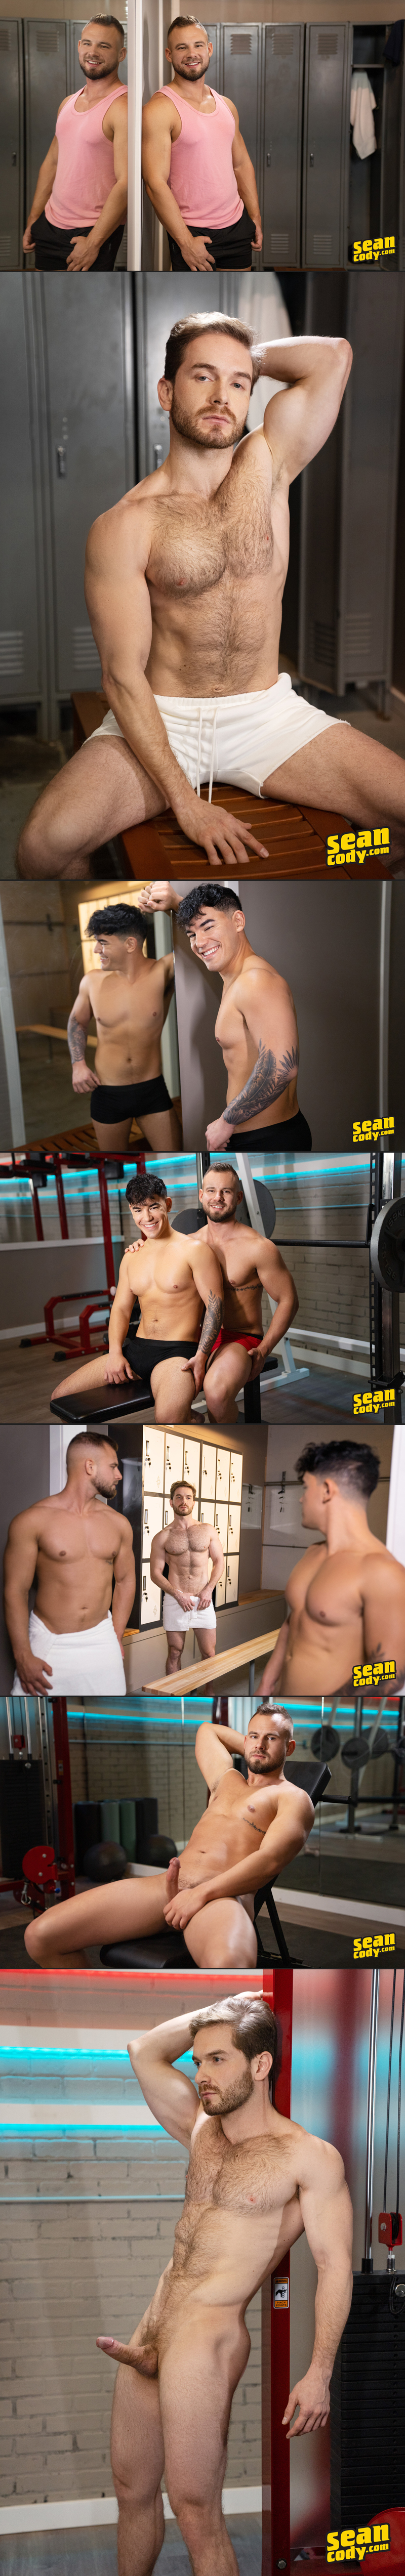 The Gym: Episode 3 (Beefy Newcomer Beck Jerks Off While Josh Fucks JC) at SeanCody